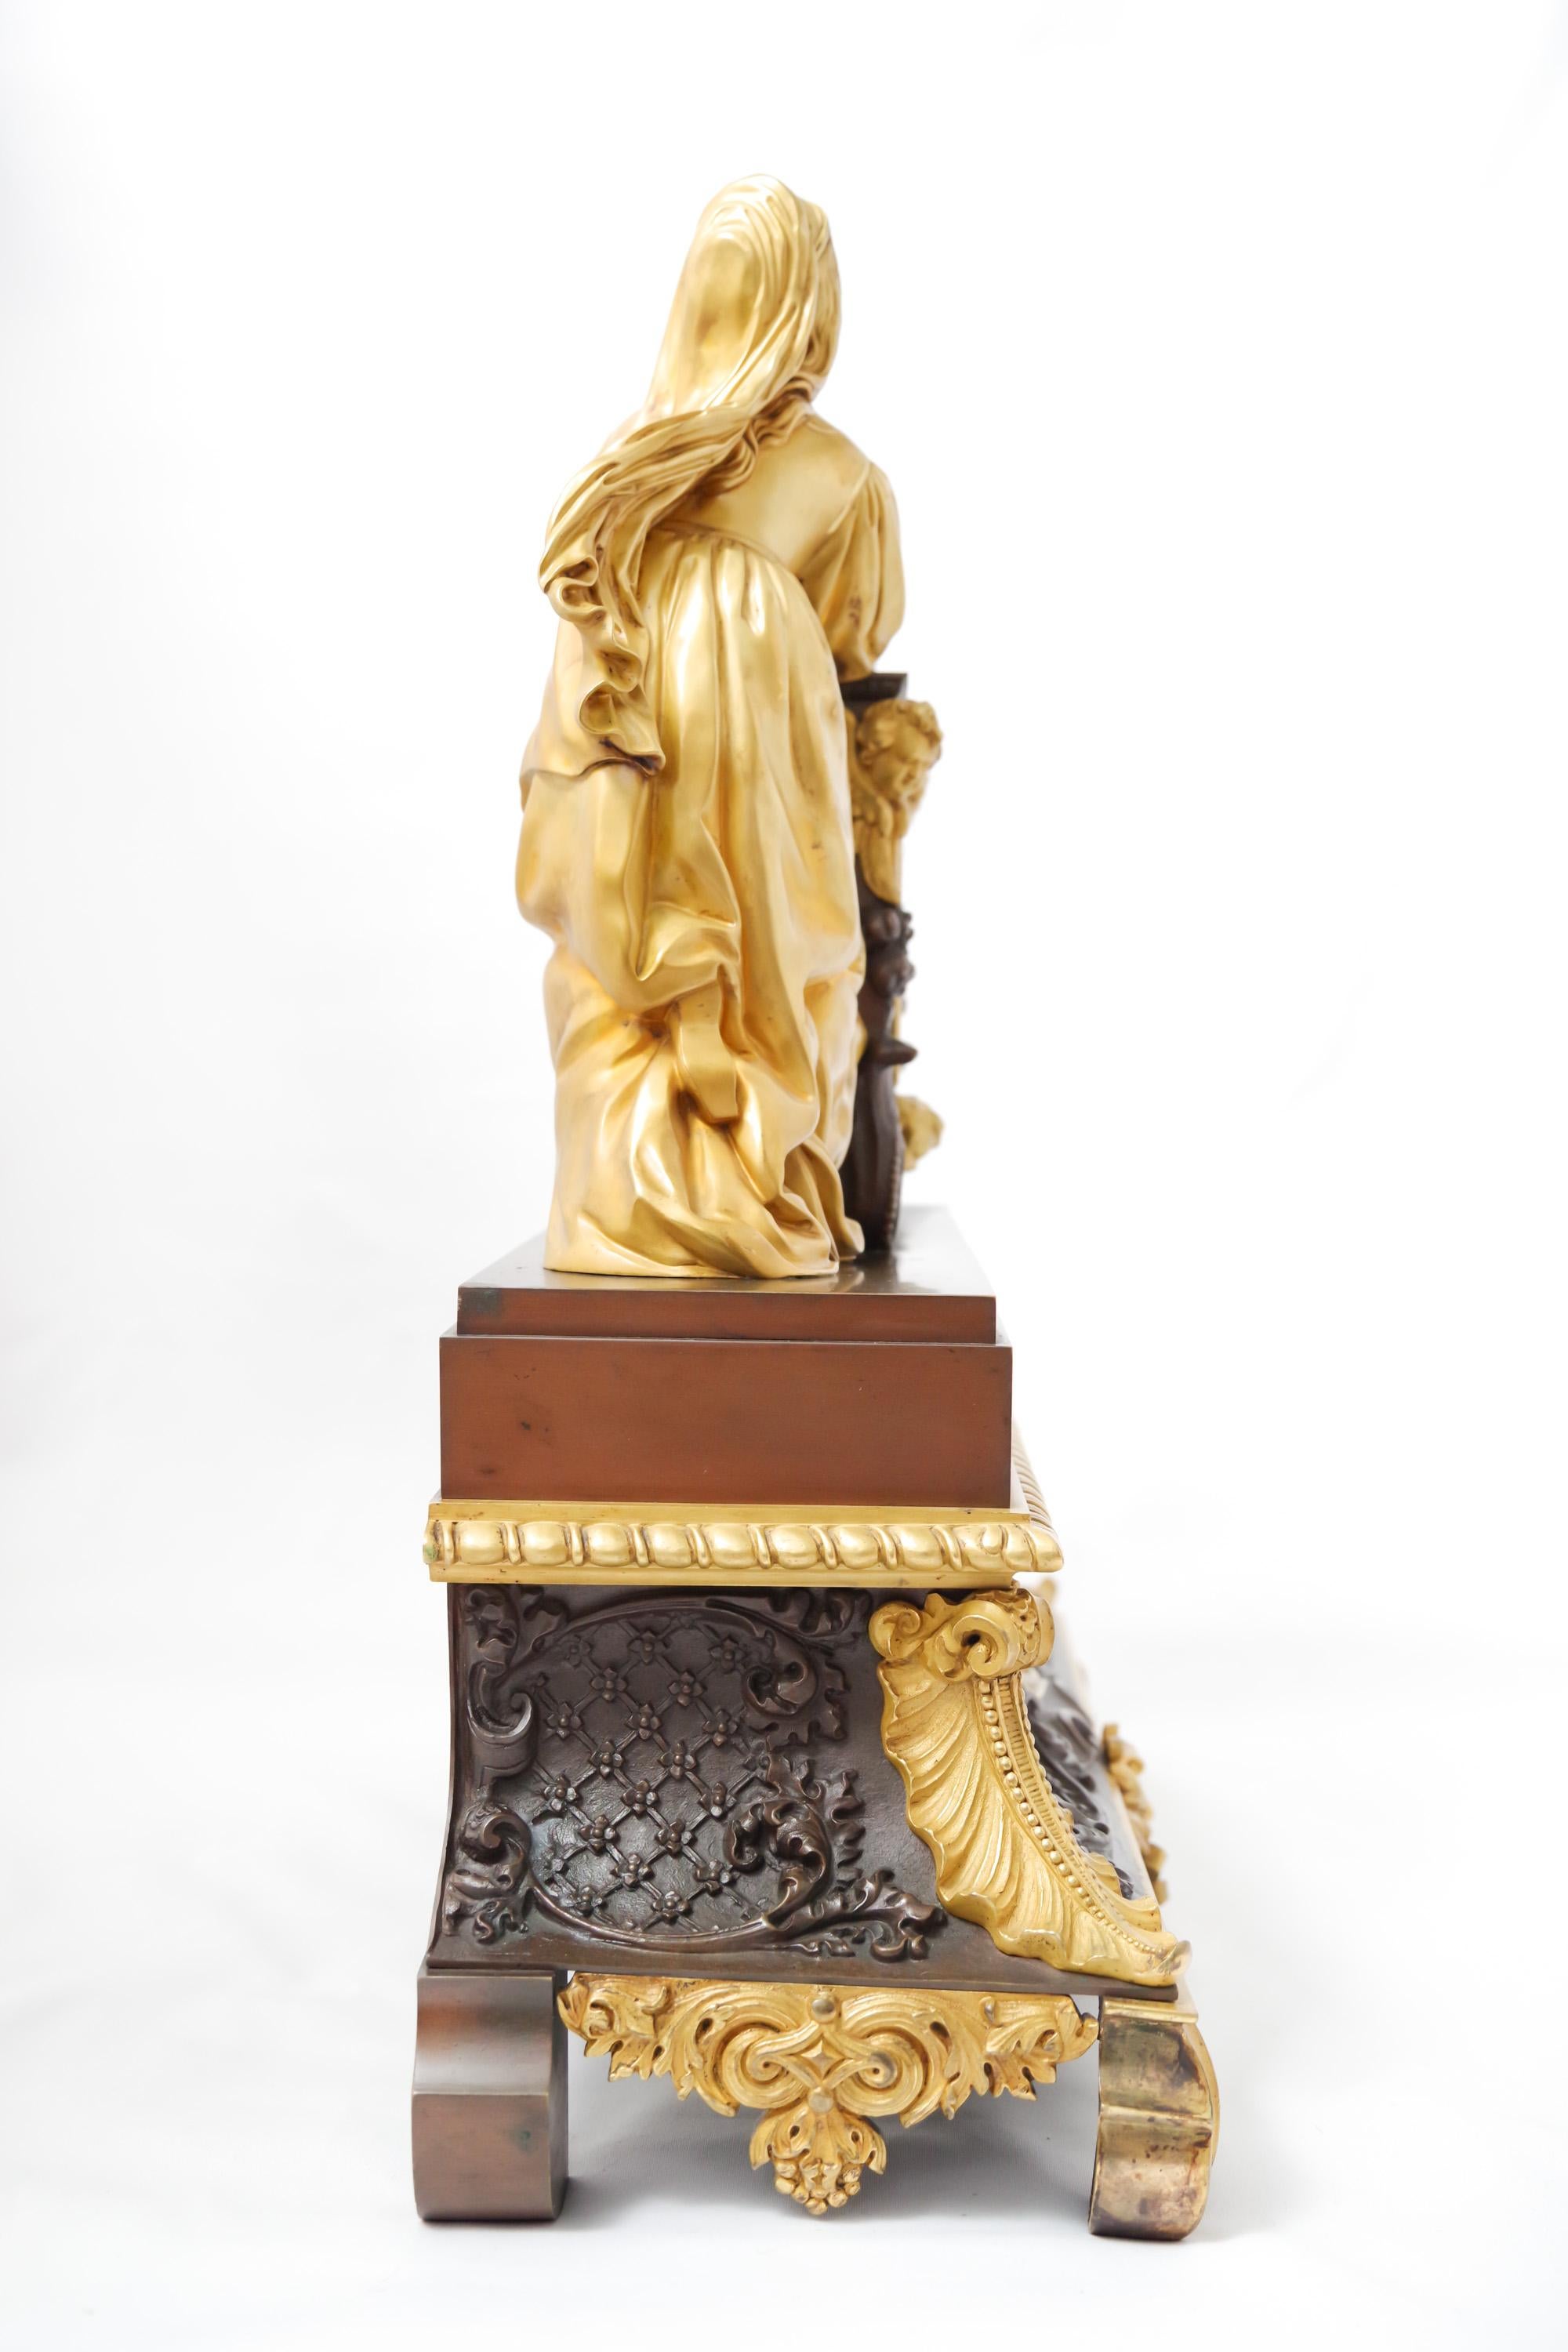 A French patinated and fire-gilt clock depicting a woman in prayer, Restauration Era, 1815-1830. The dial is silvered-bronze. The silk-thread mechanism is in good working condition with key and pendulum.